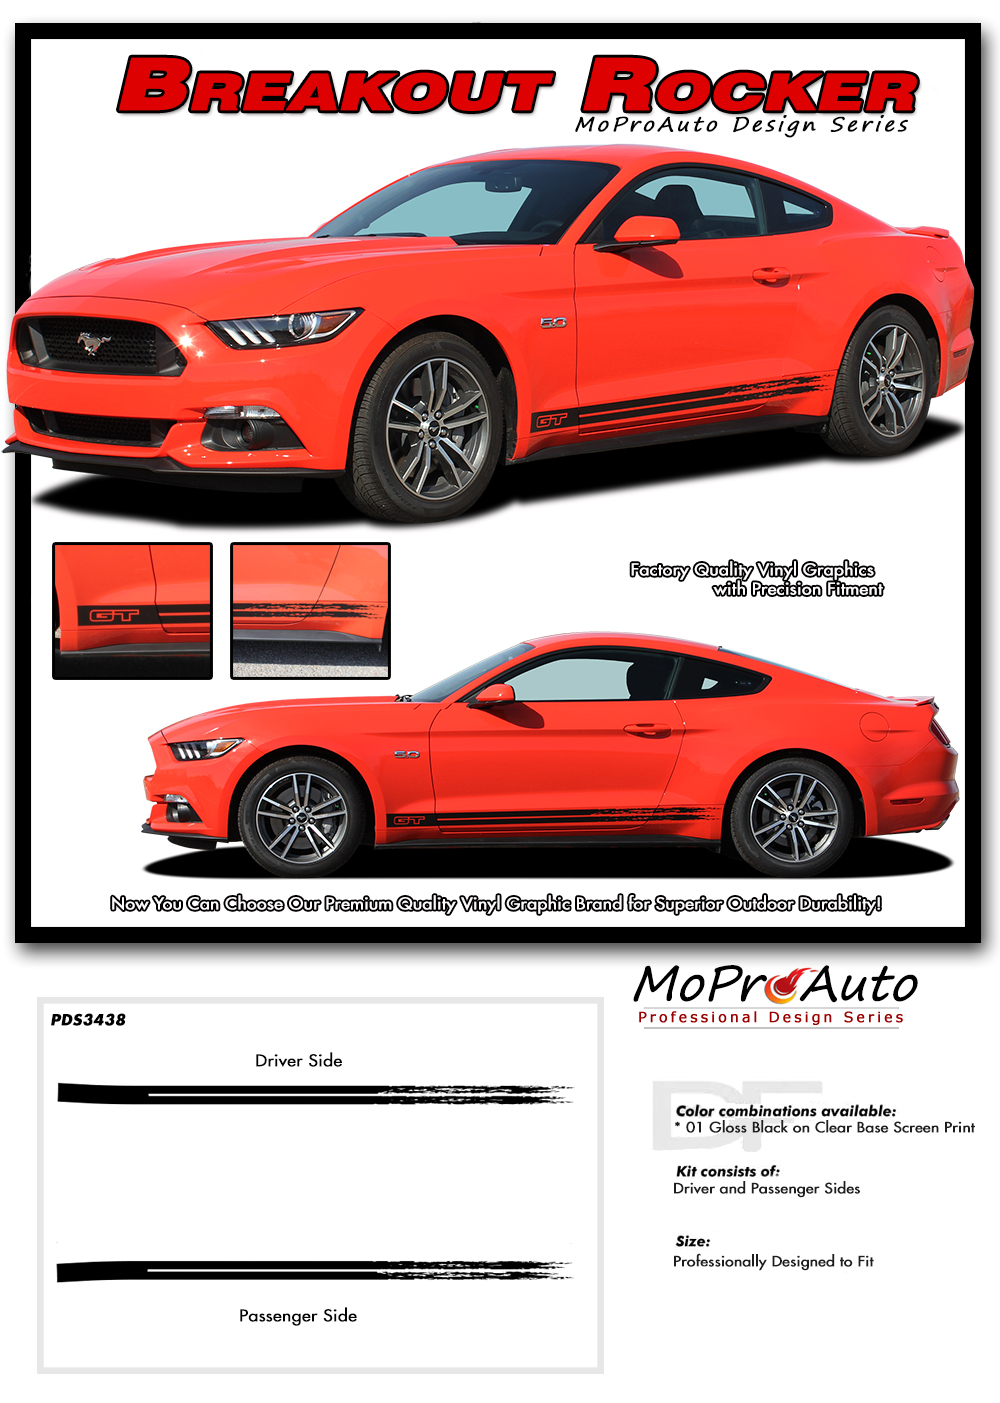 2015 2016 2017 2018 2019 2020 2021 2022 BREAKOUT ROCKER GT Ford Mustang - MoProAuto Pro Design Series Vinyl Graphics and Decals Kit